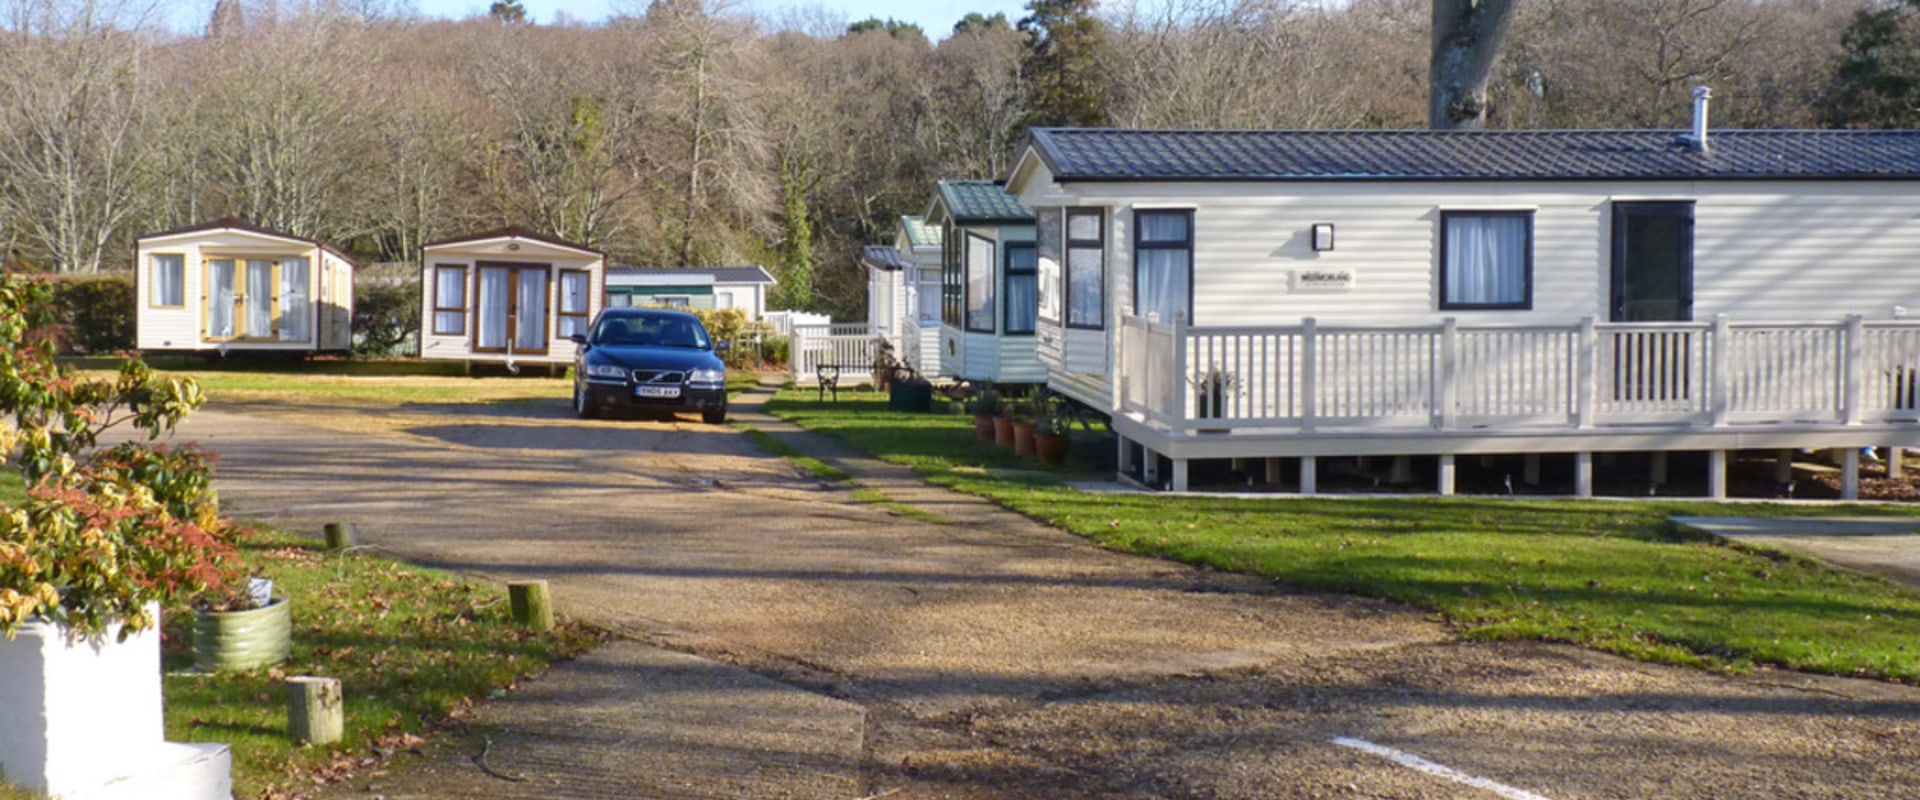 The Pros and Cons of RV and Mobile Home Parks for Retirement Communities